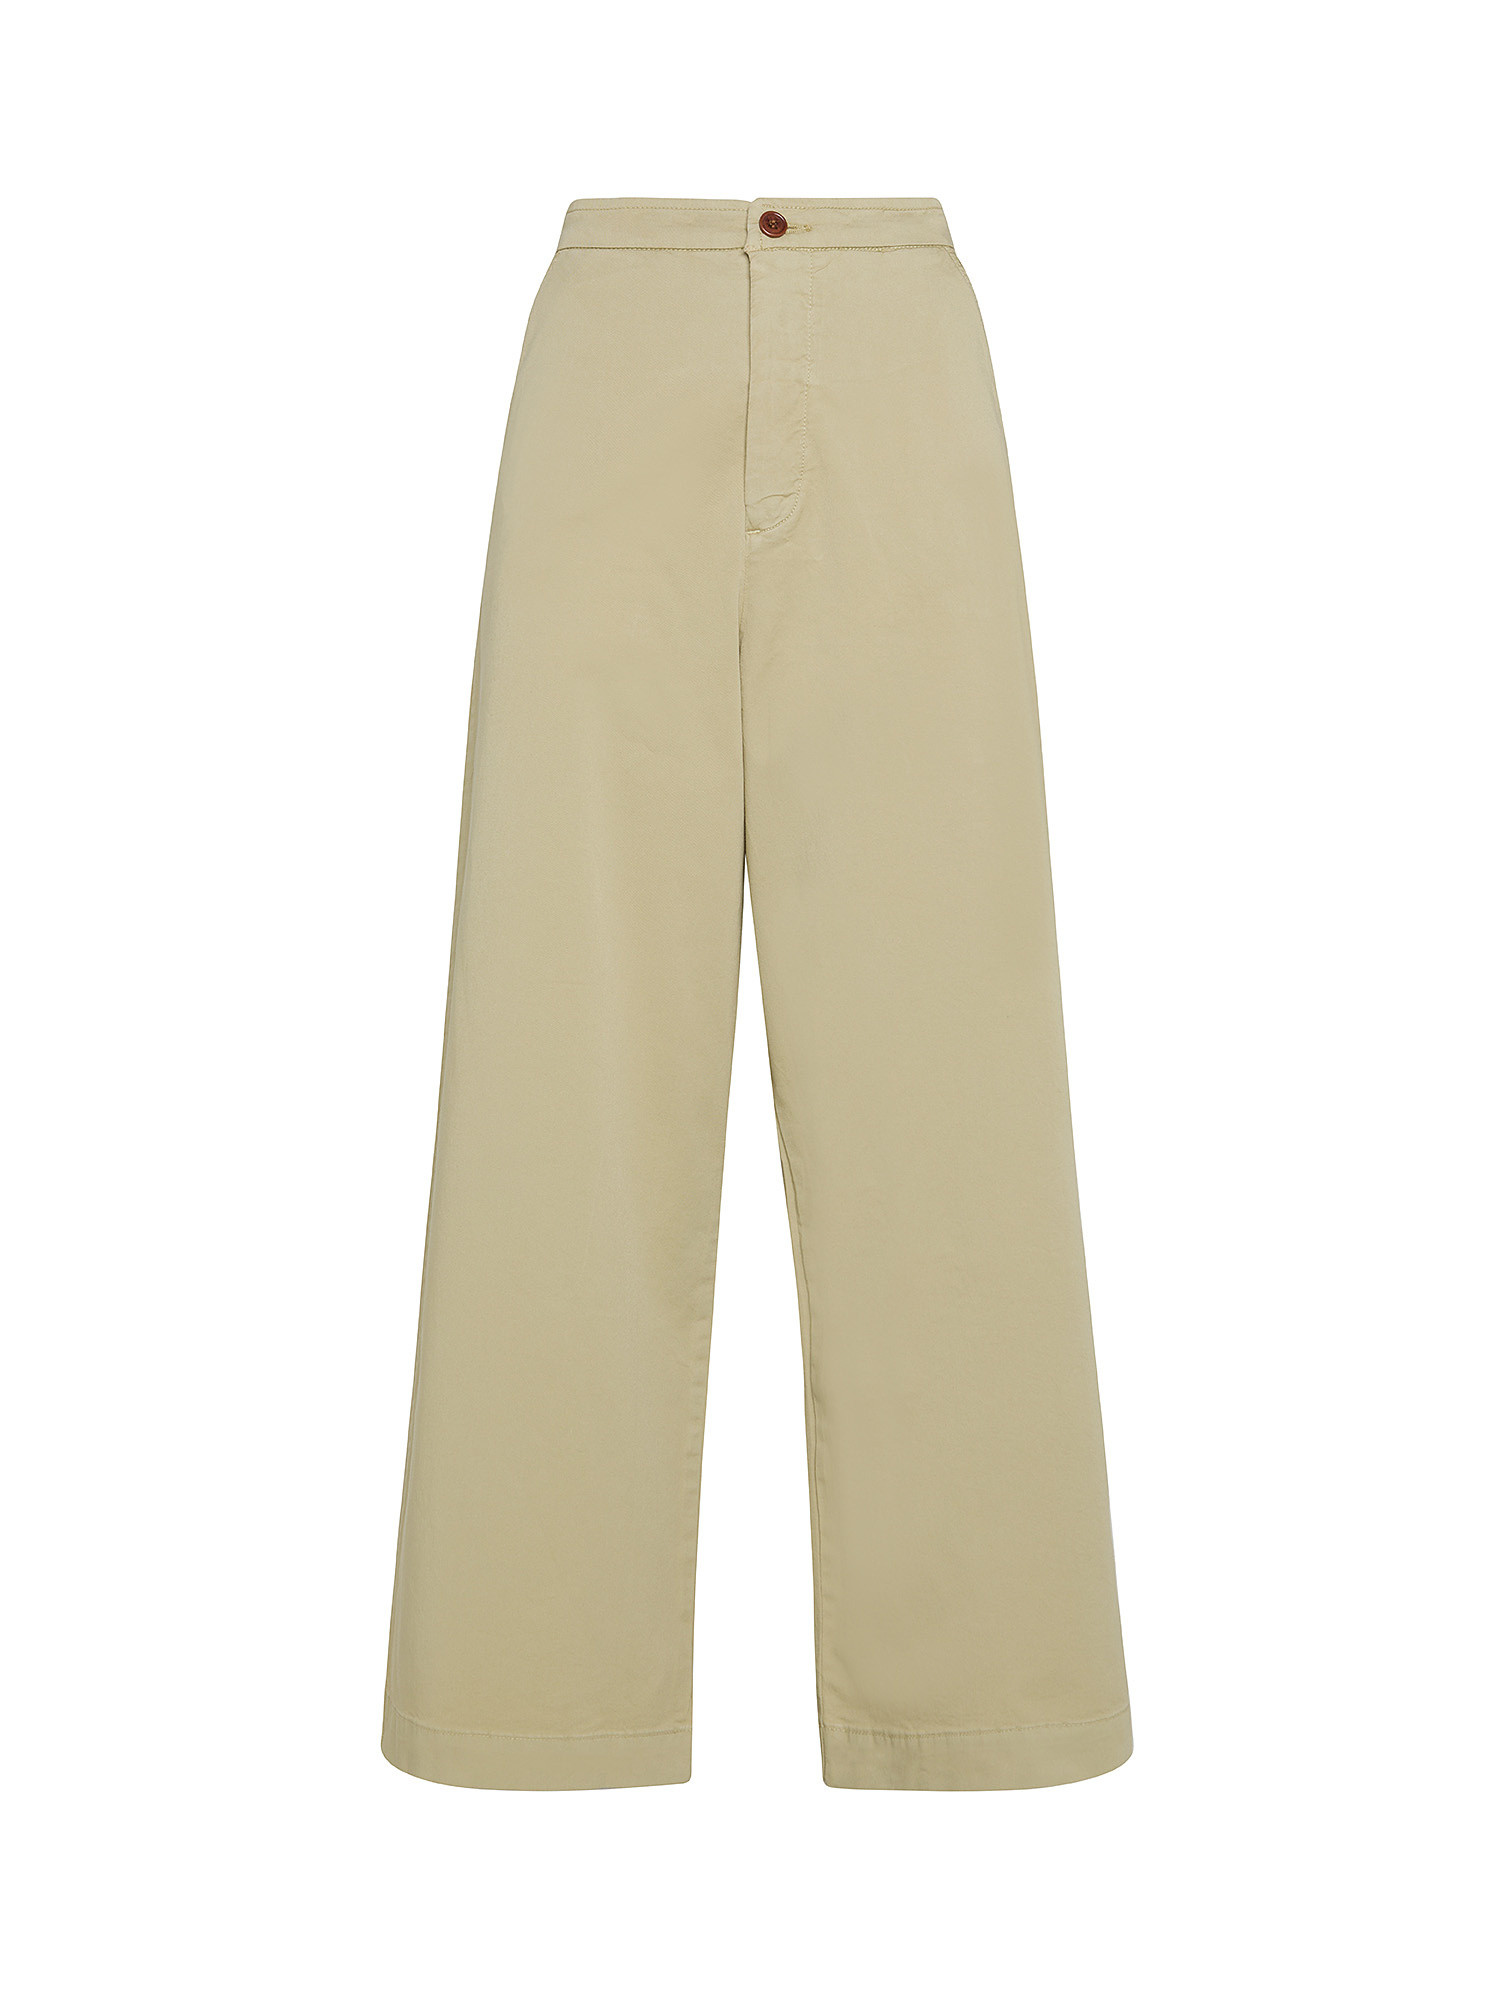 Attic and Barn - Ferdinando trousers in stretch cotton, Beige, large image number 0